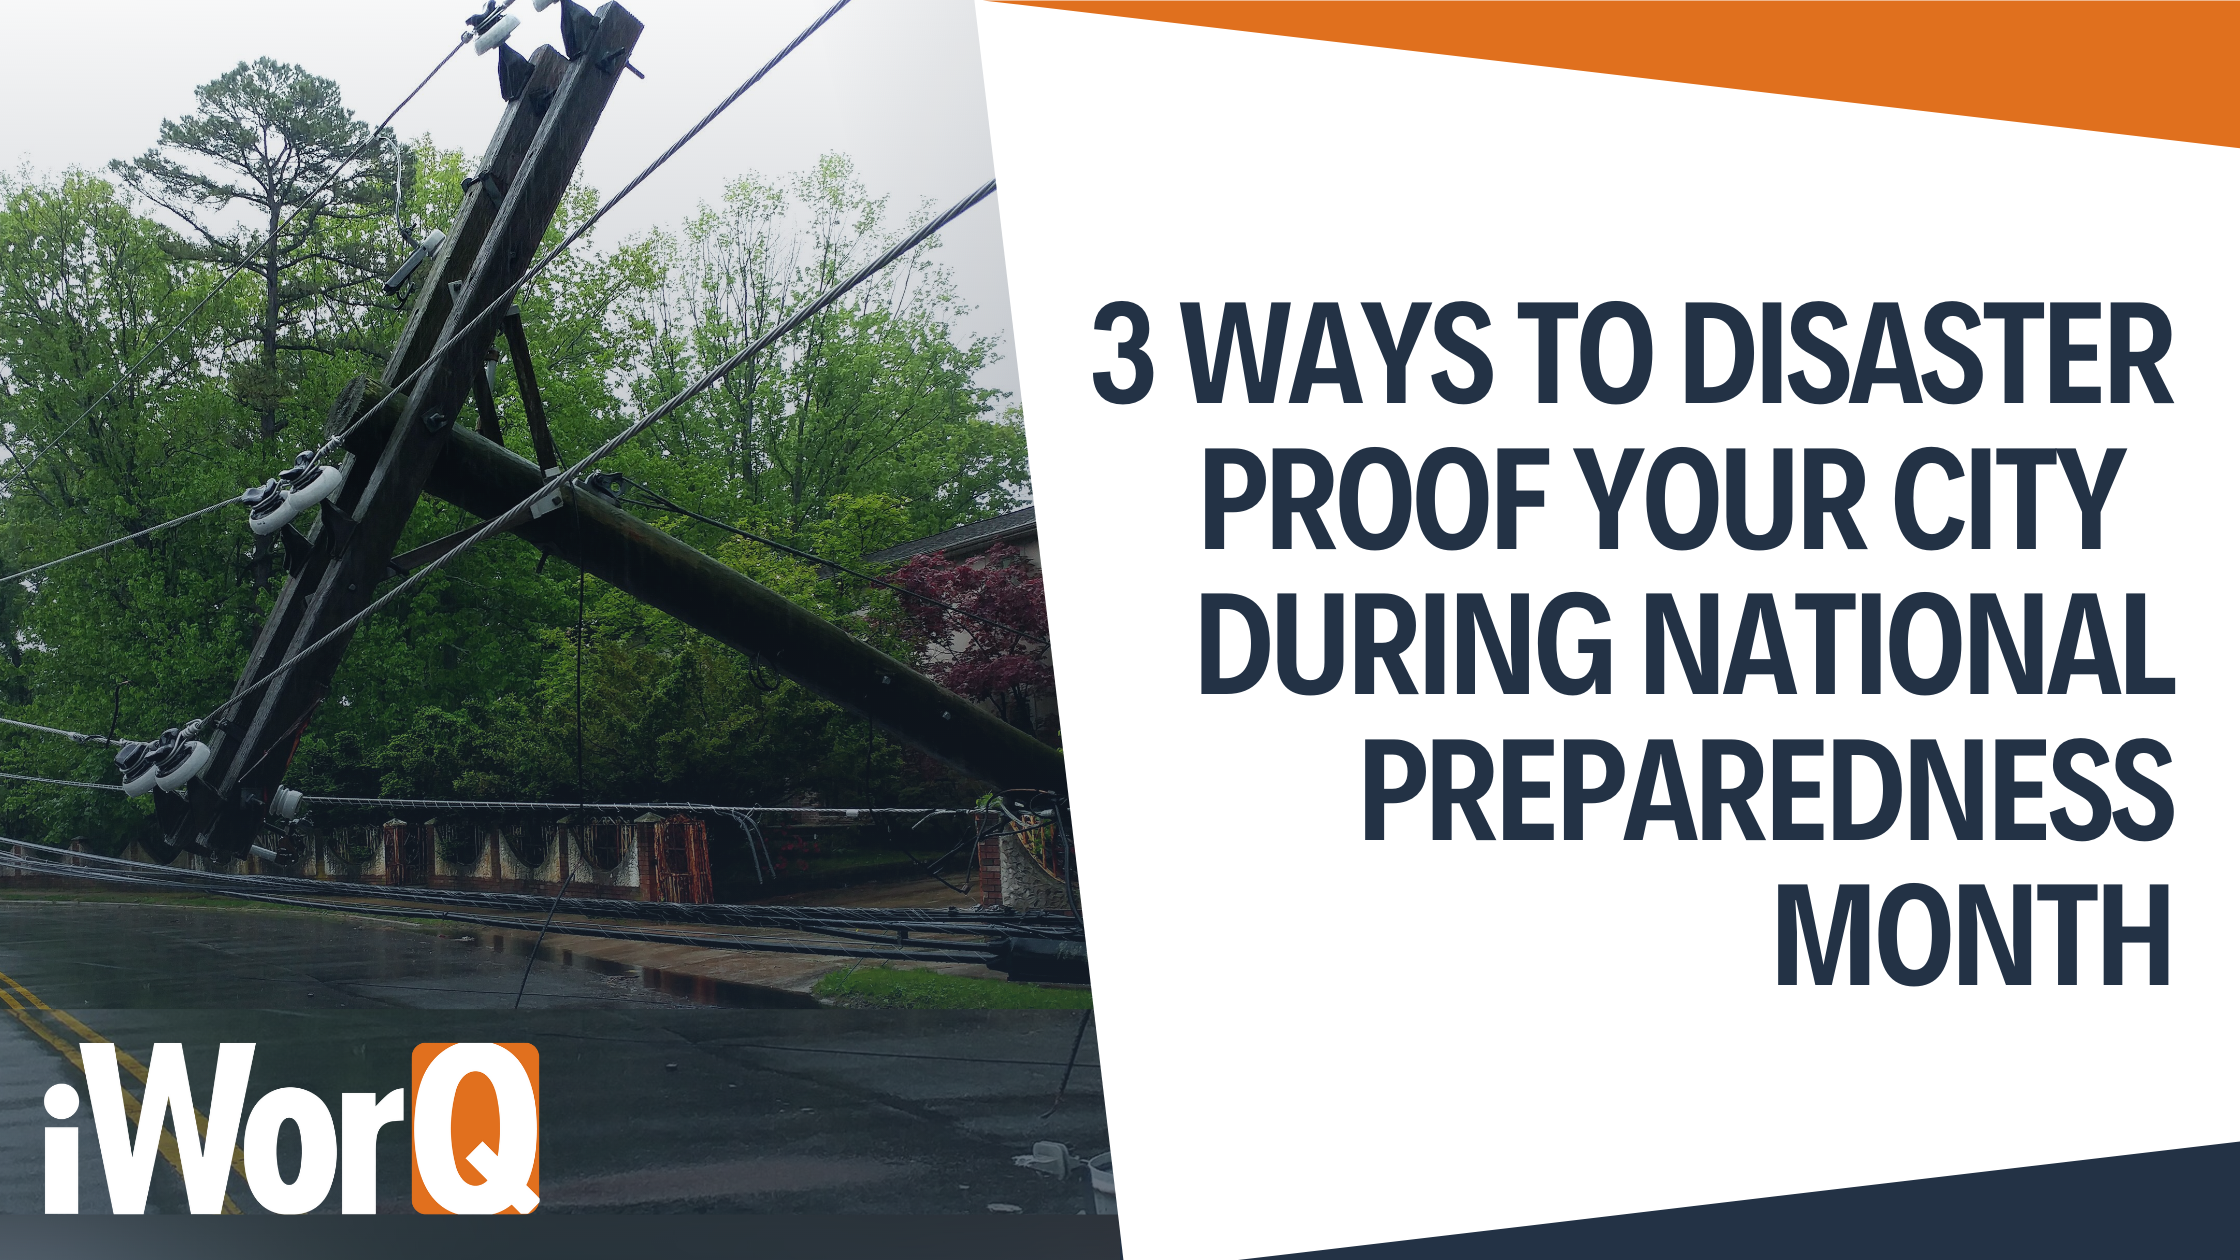 Featured image for “3 Ways to Disaster Proof Your City During National Preparedness Month”